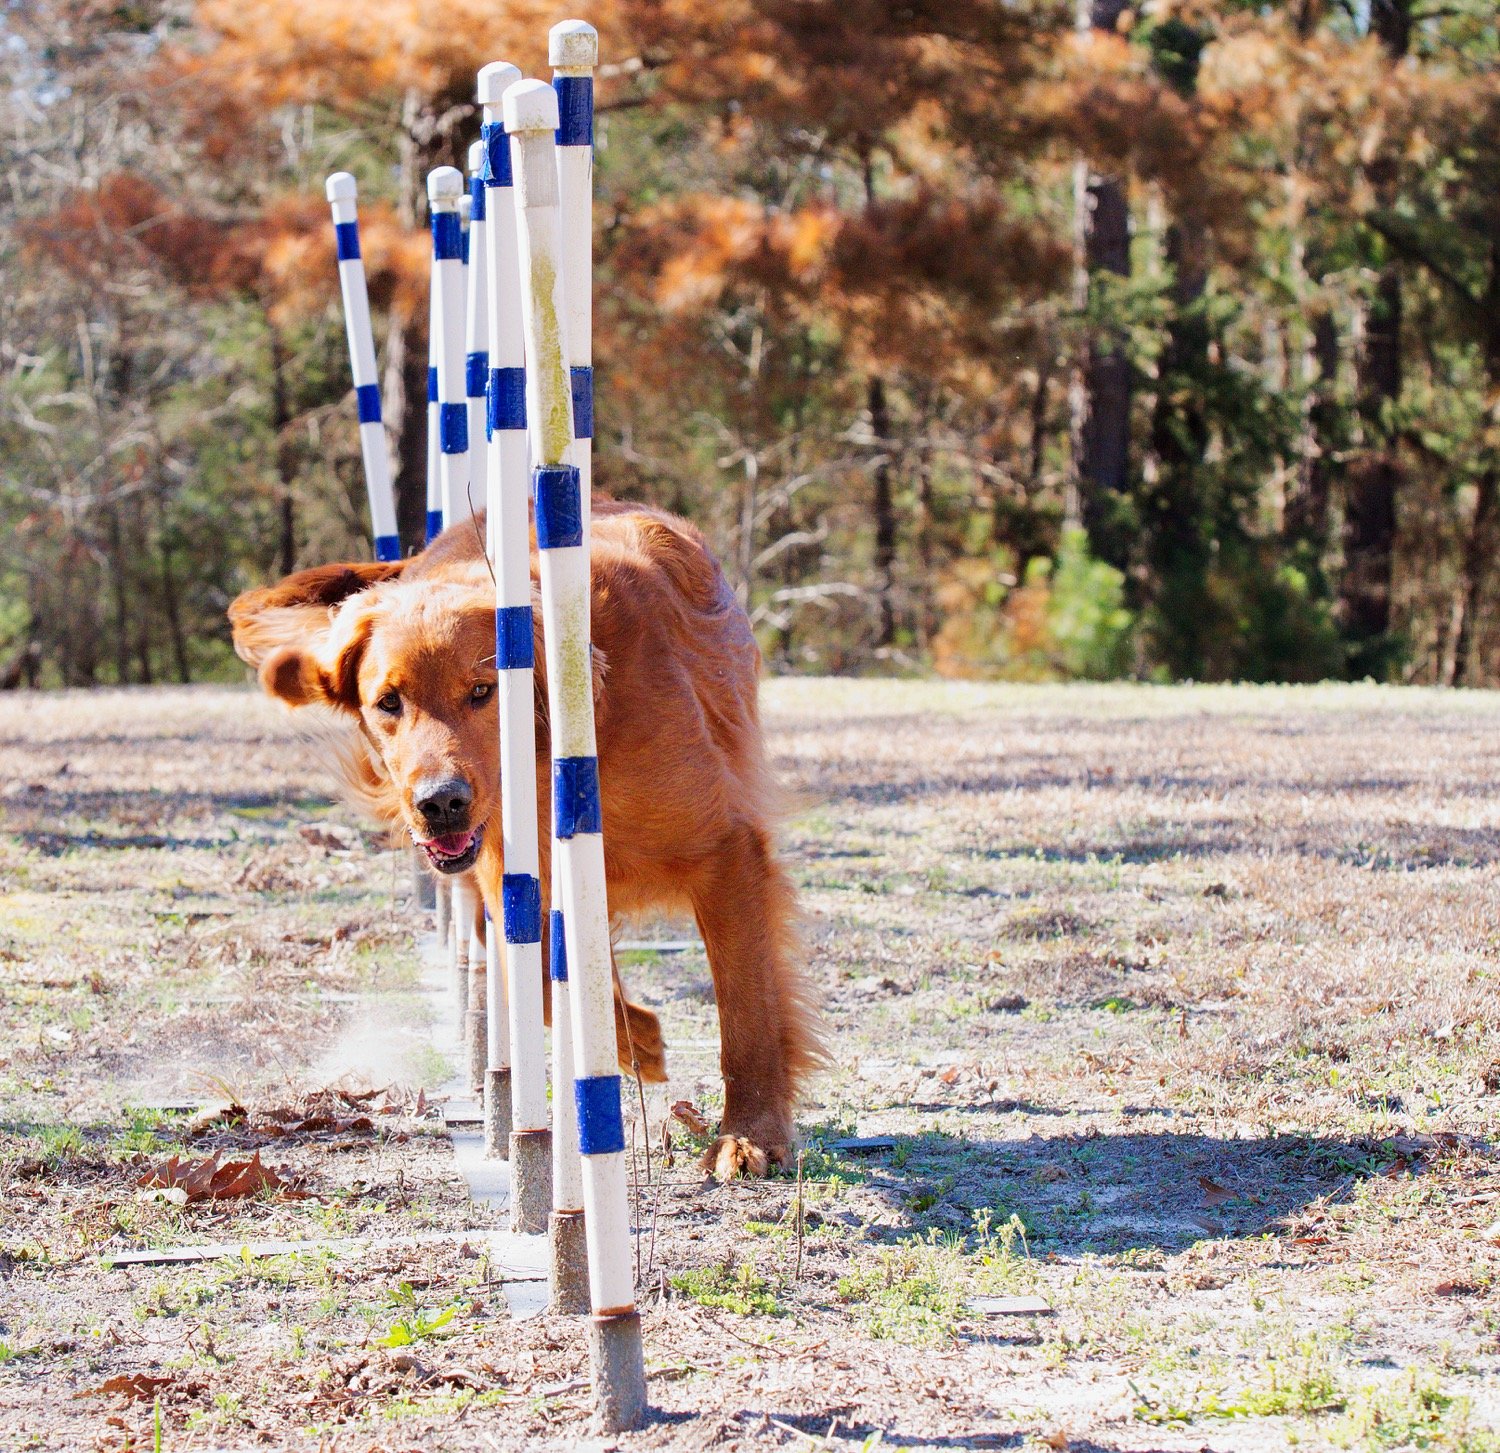 Trap weaves through some poles for exercise and fun – not part of his competition training. [take paws to enjoy full photos, score prints]